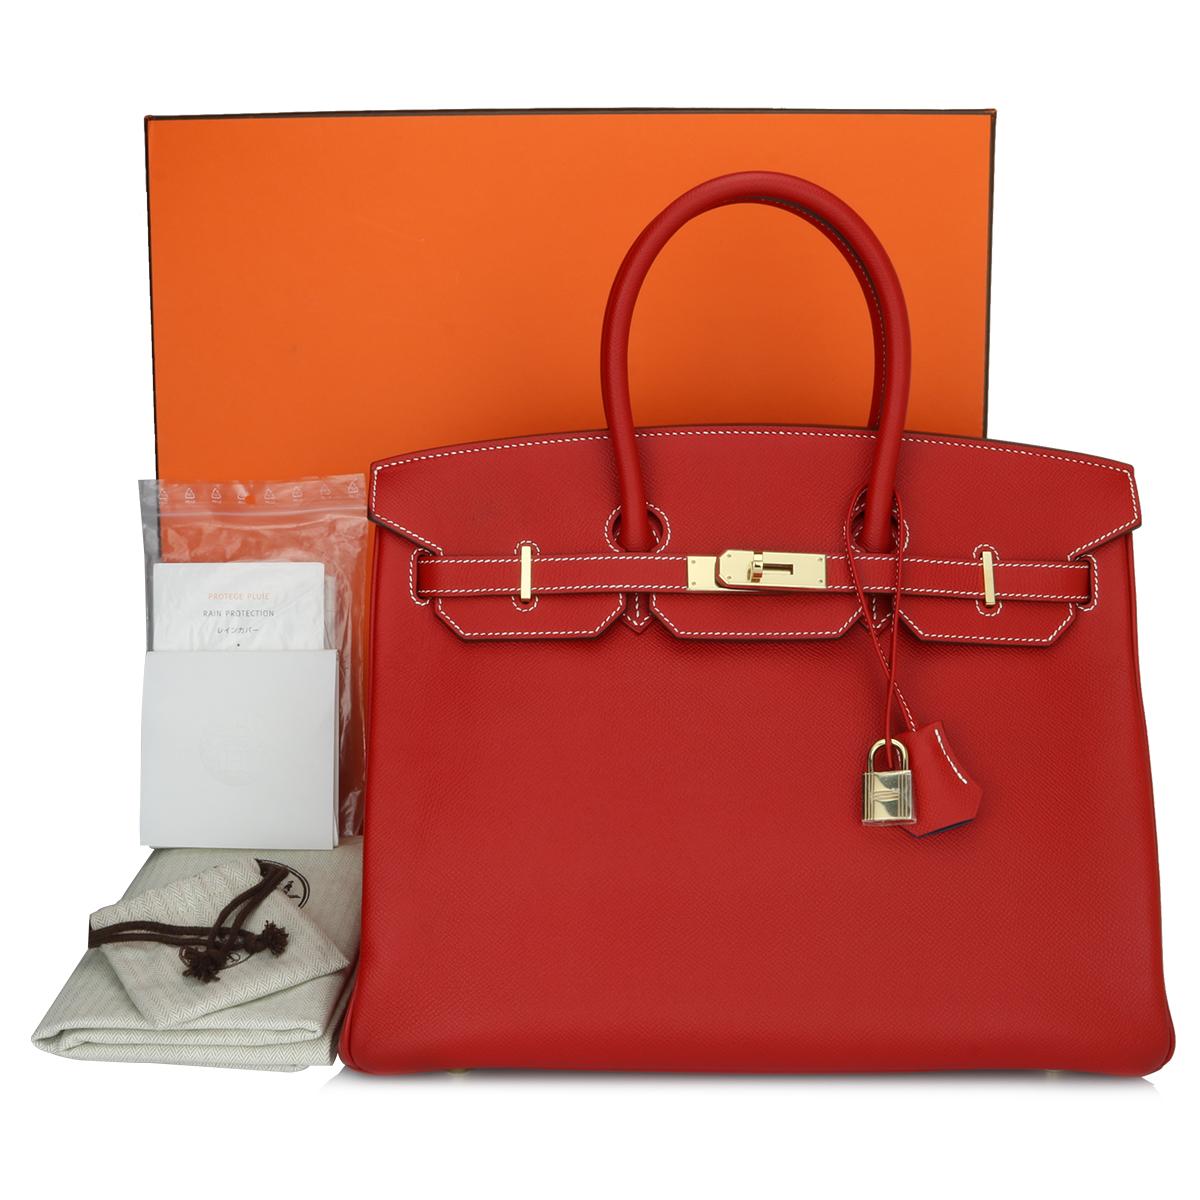 Authentic Hermès Birkin Bag 35cm Candy Rouge Casaque/Bleu Thalassa Epsom Leather with Champagne Gold Hardware Stamp P_Year 2012.

This bag is still in a brand new condition. The leather still smells fresh as when new, along with it still holding to